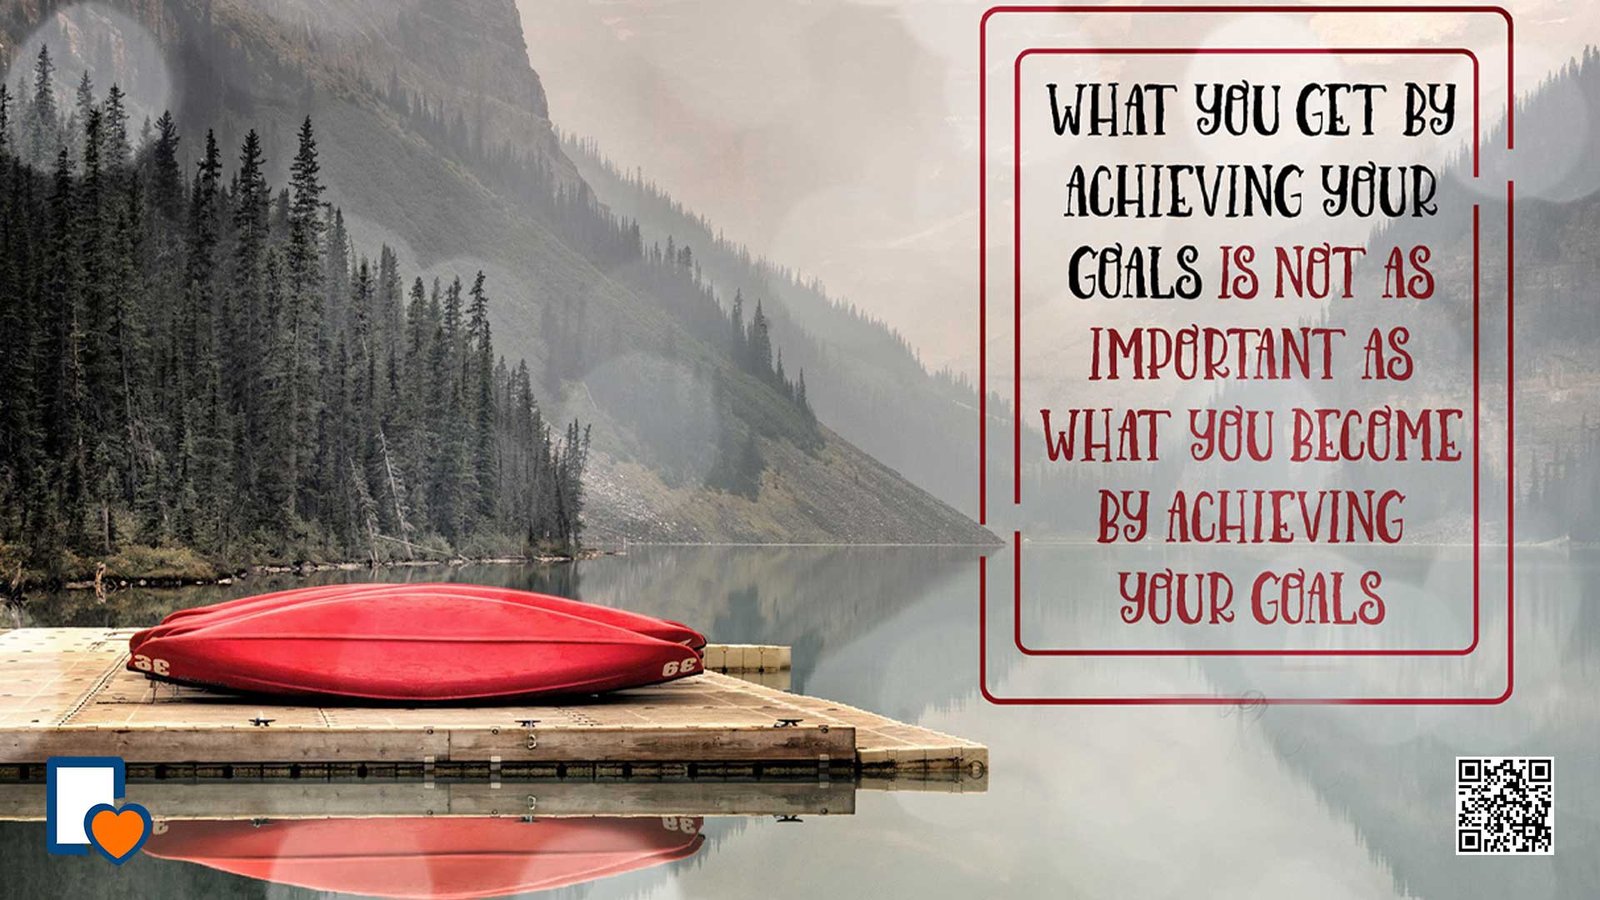 What You Get By Achieving Your Goals Is Not As Important As What You Become By Achieving Your Goals -Goethe